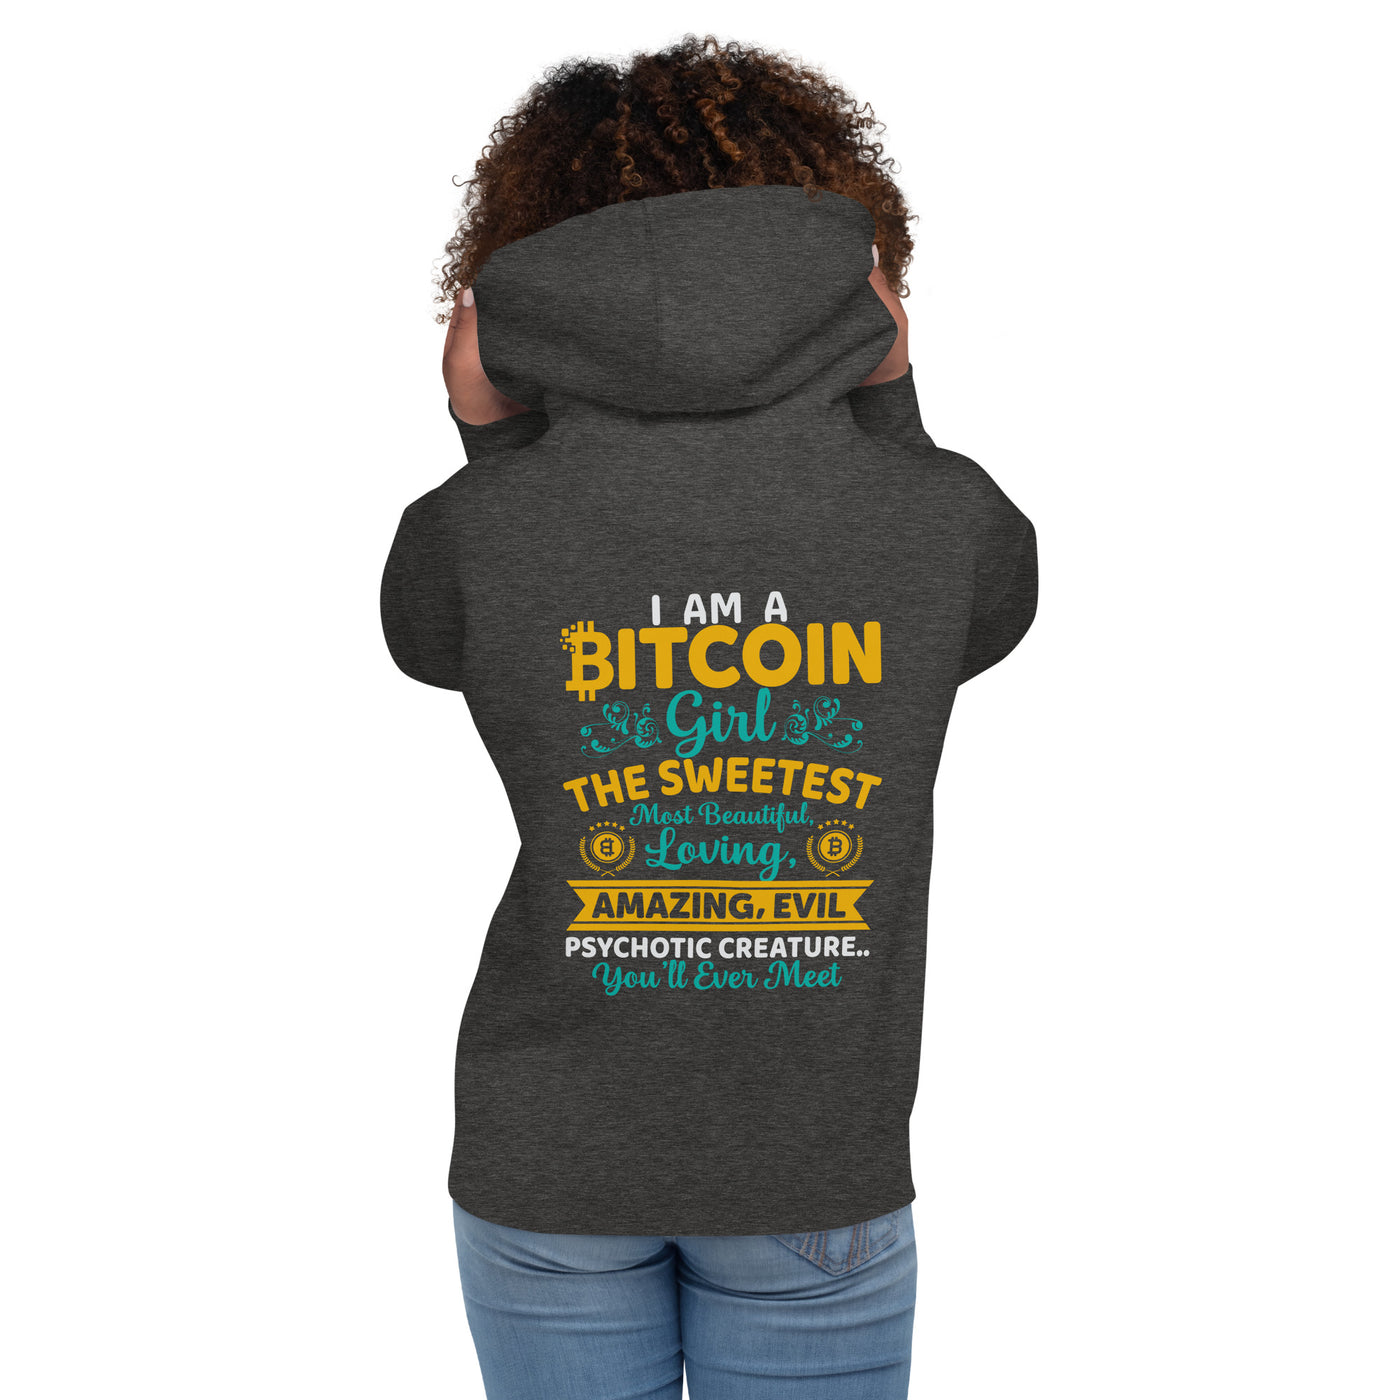 I am a Bitcoin Girl, the sweetest - Unisex Hoodie ( Back Print )